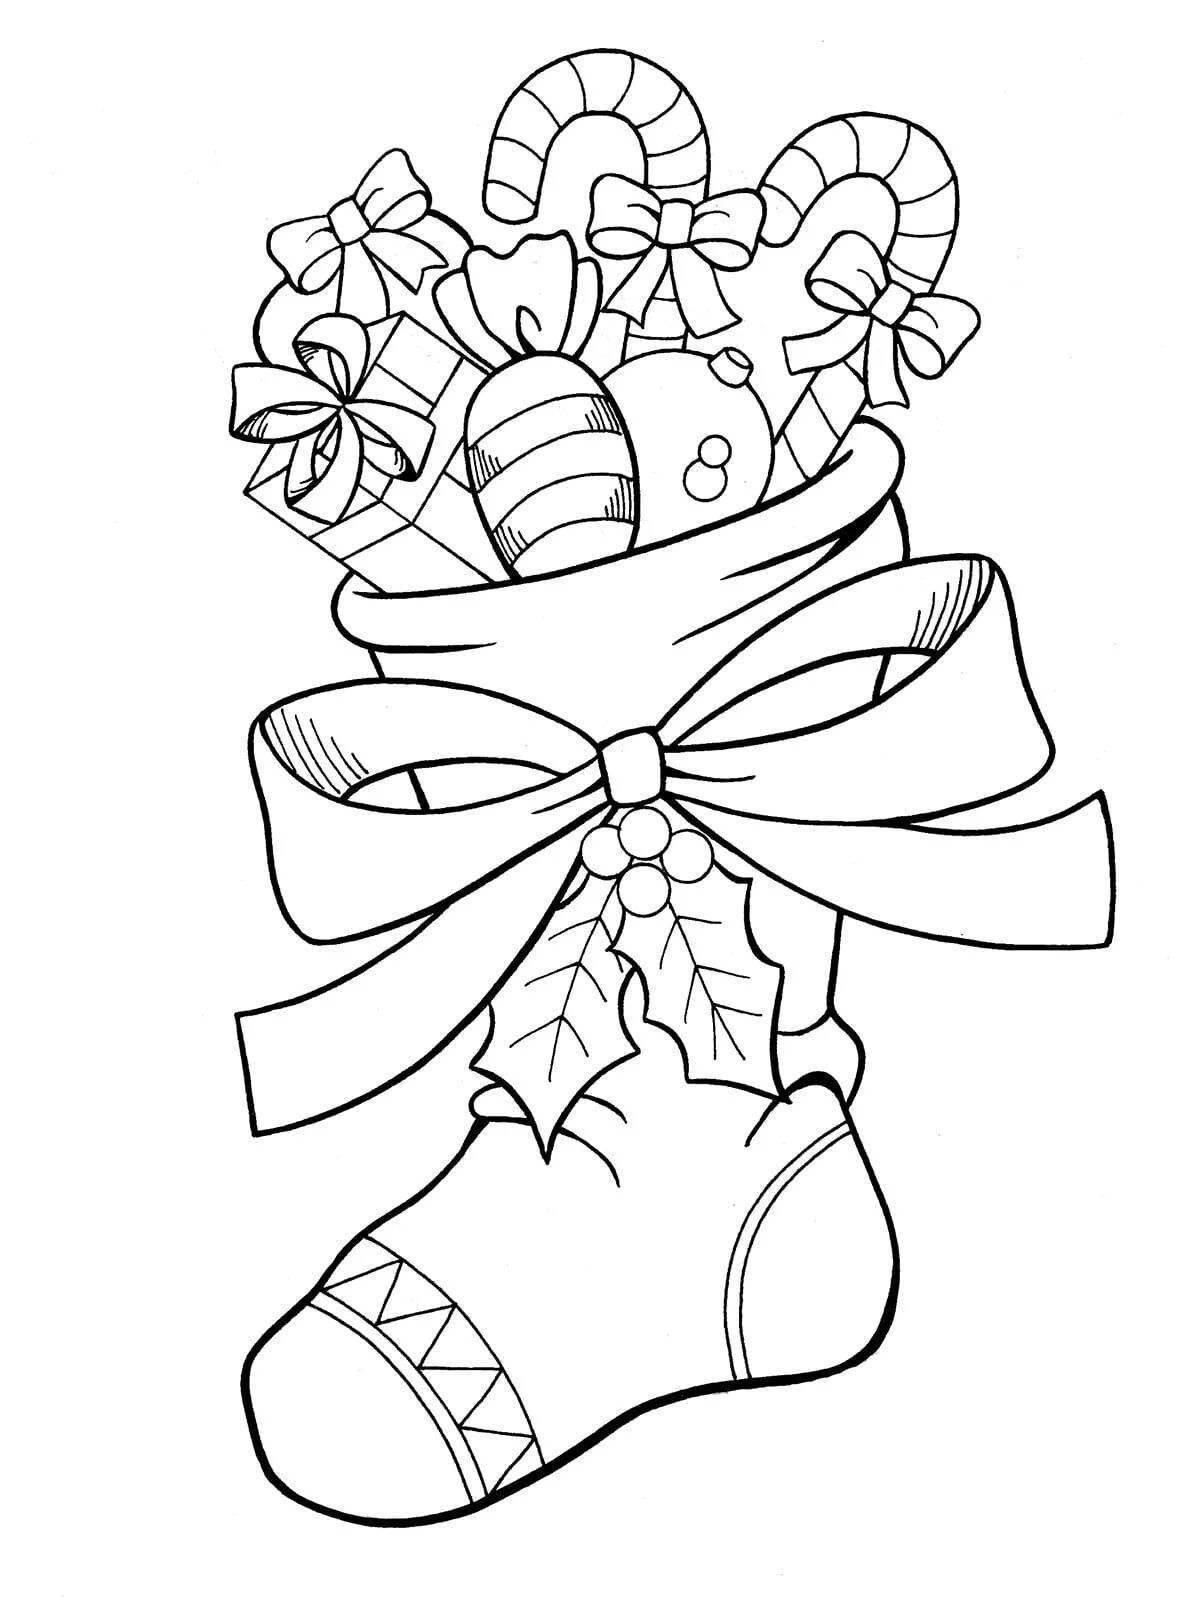 Holiday stocking coloring page